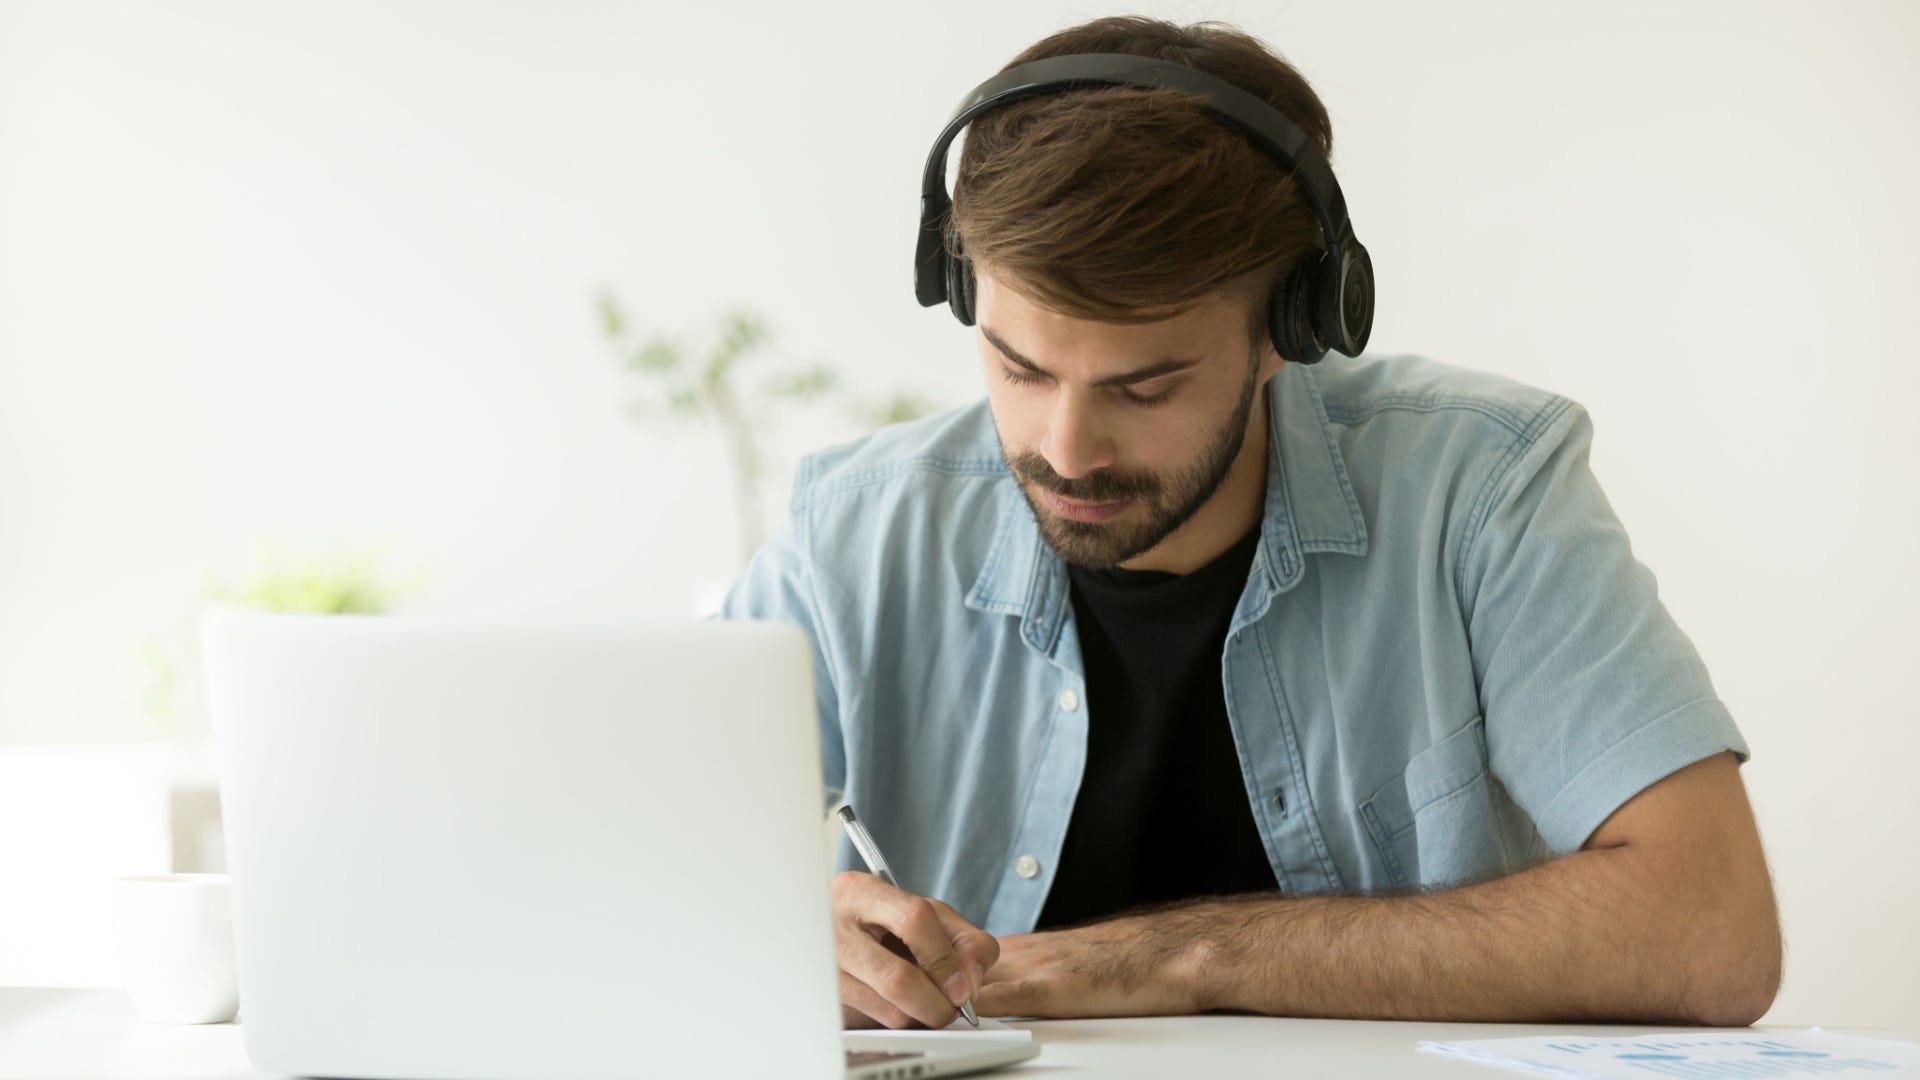 Focused man wearing headphones writing notes studying with laptop.